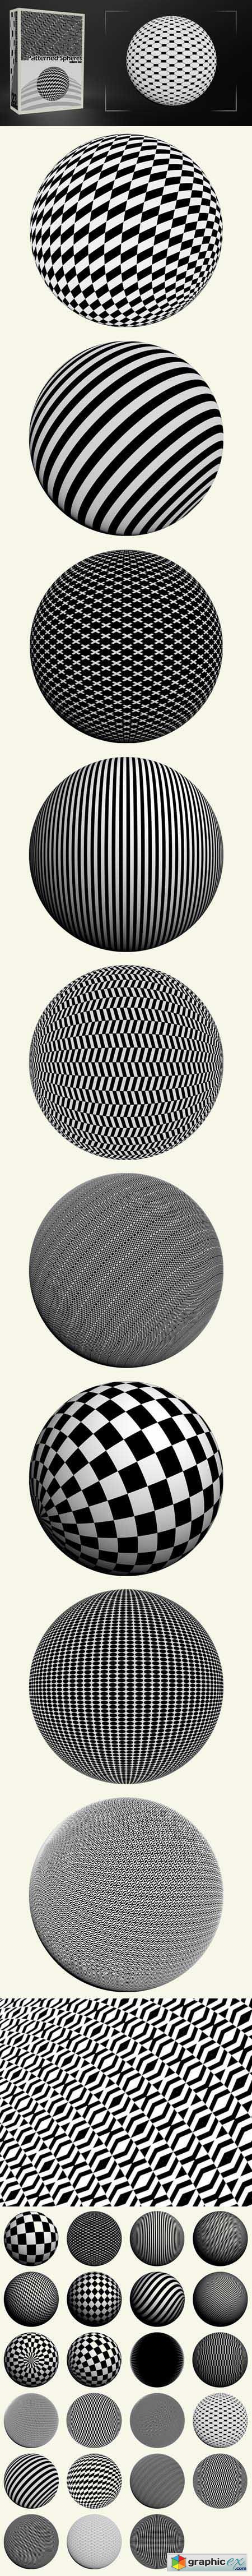 Patterned Spheres Pack - 23 Brushes and Images (Re-Up)